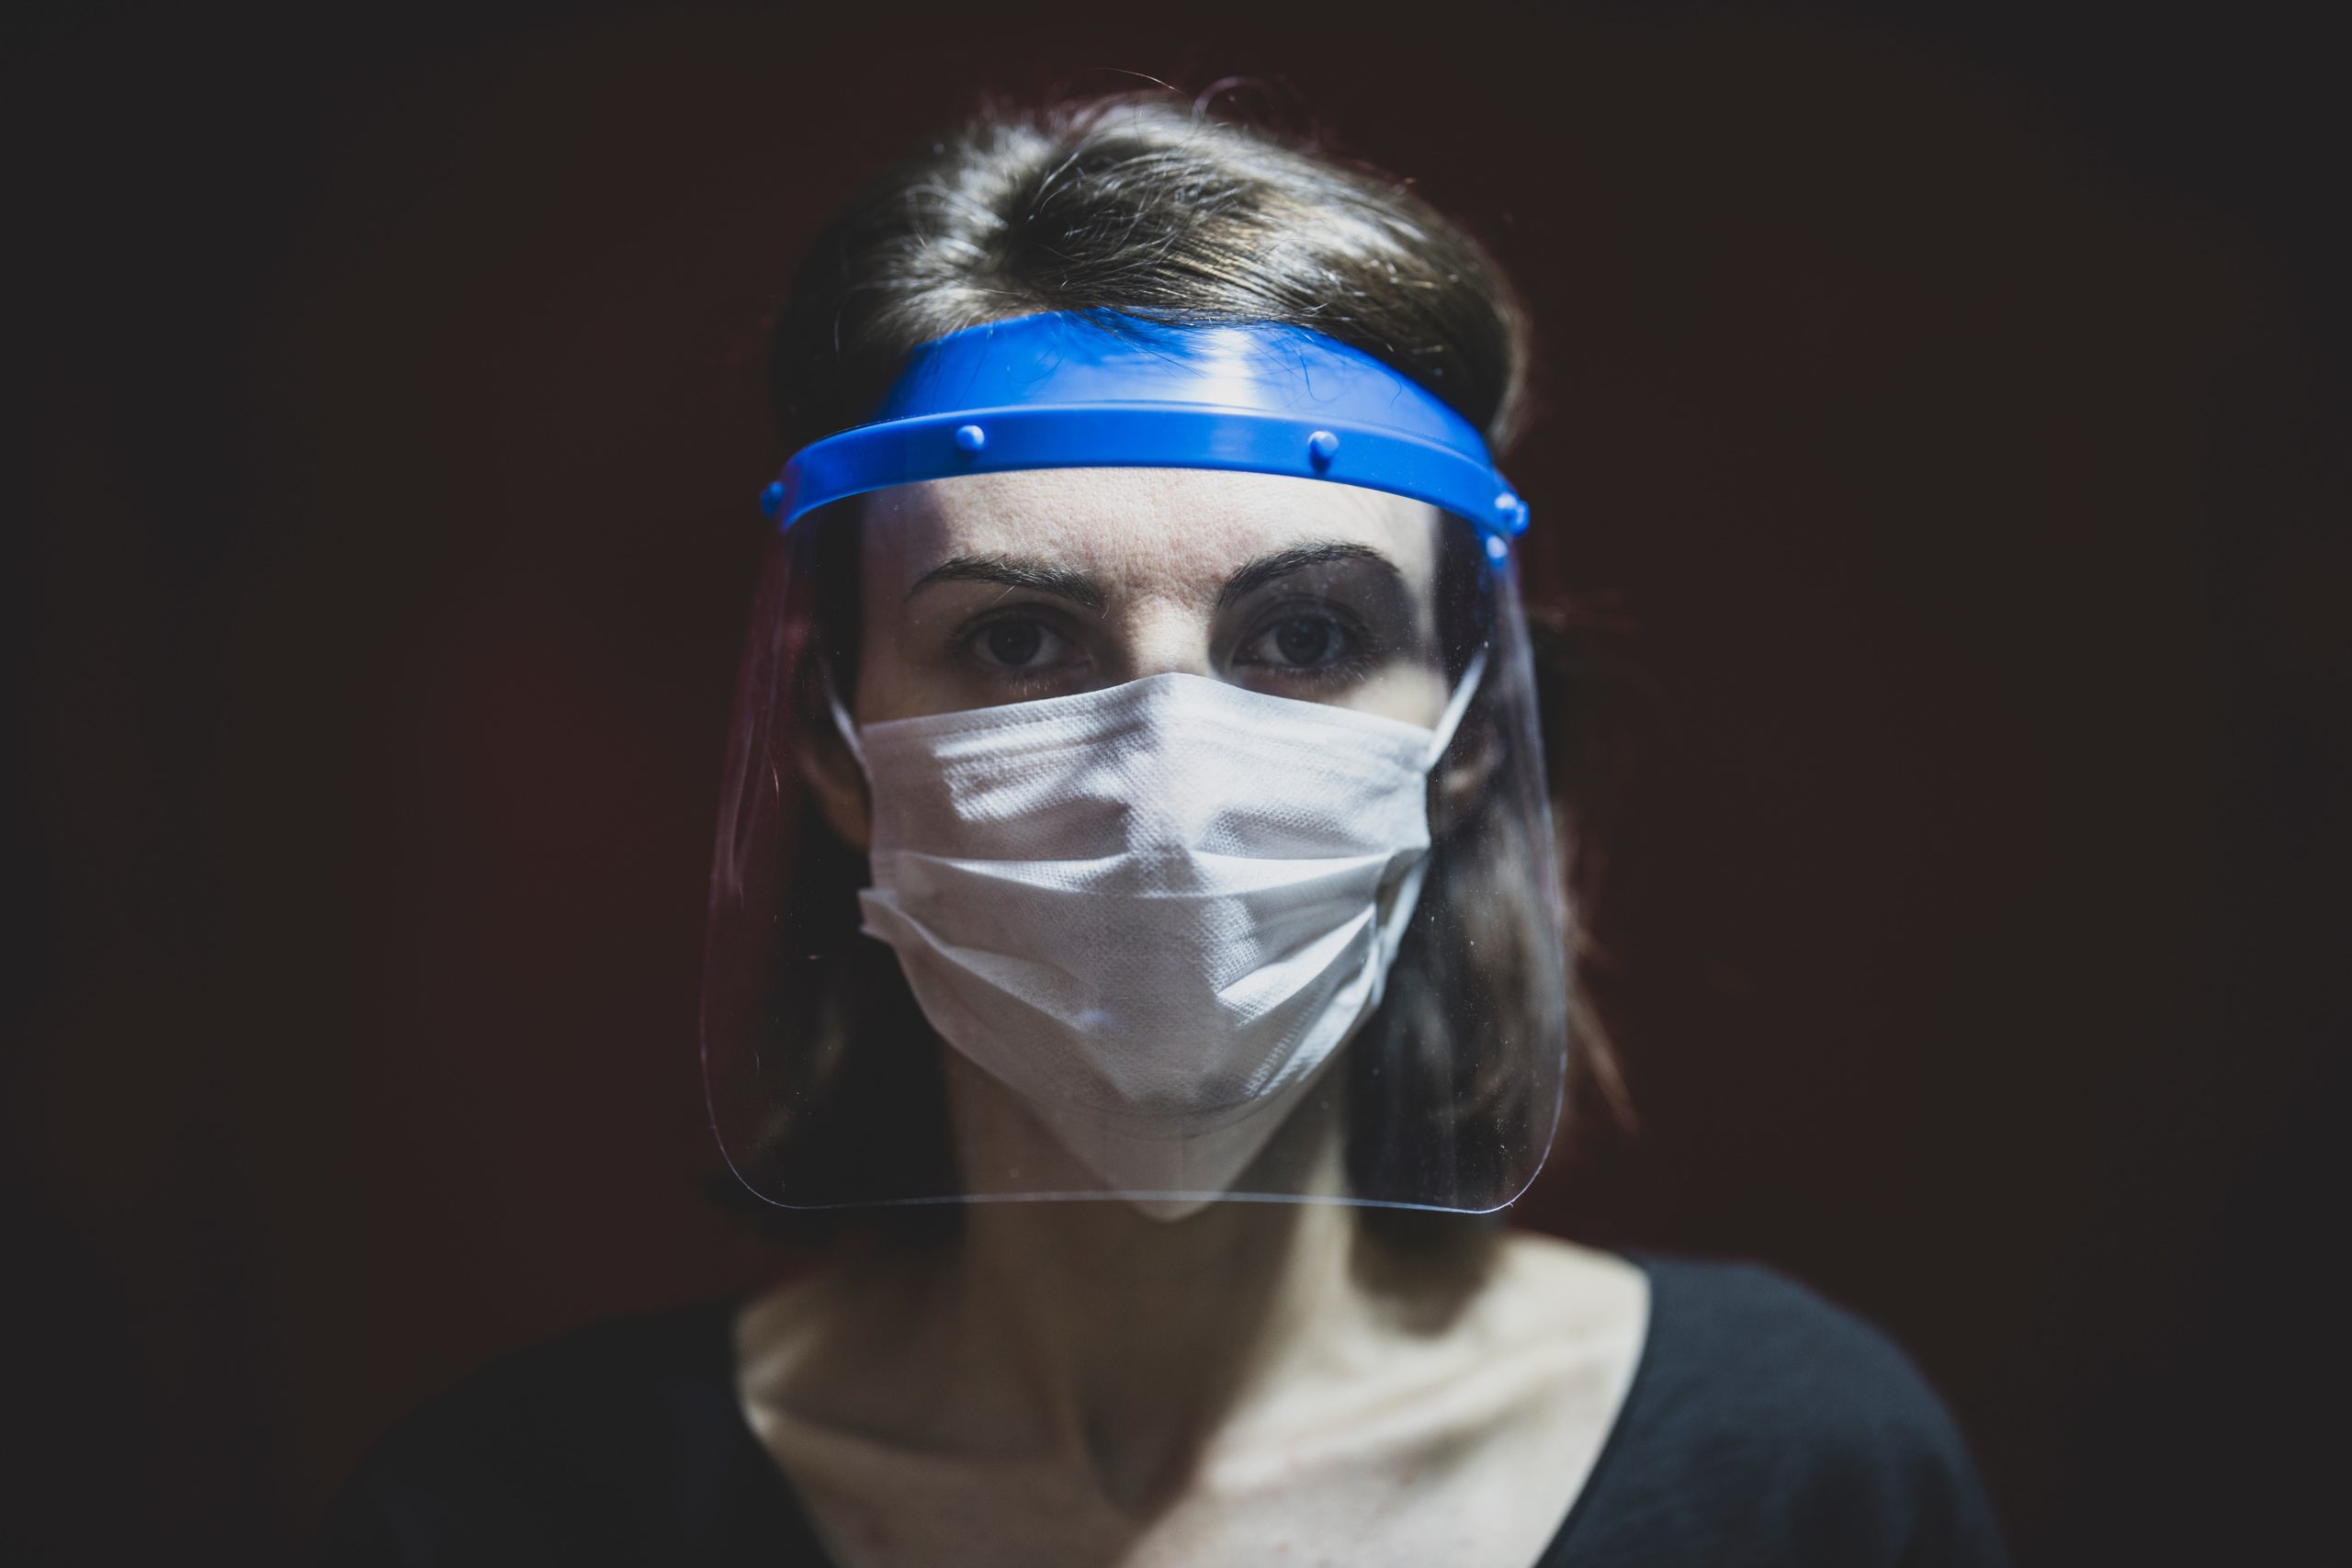 Plastic face shields do not control the spread of COVID-19, study finds